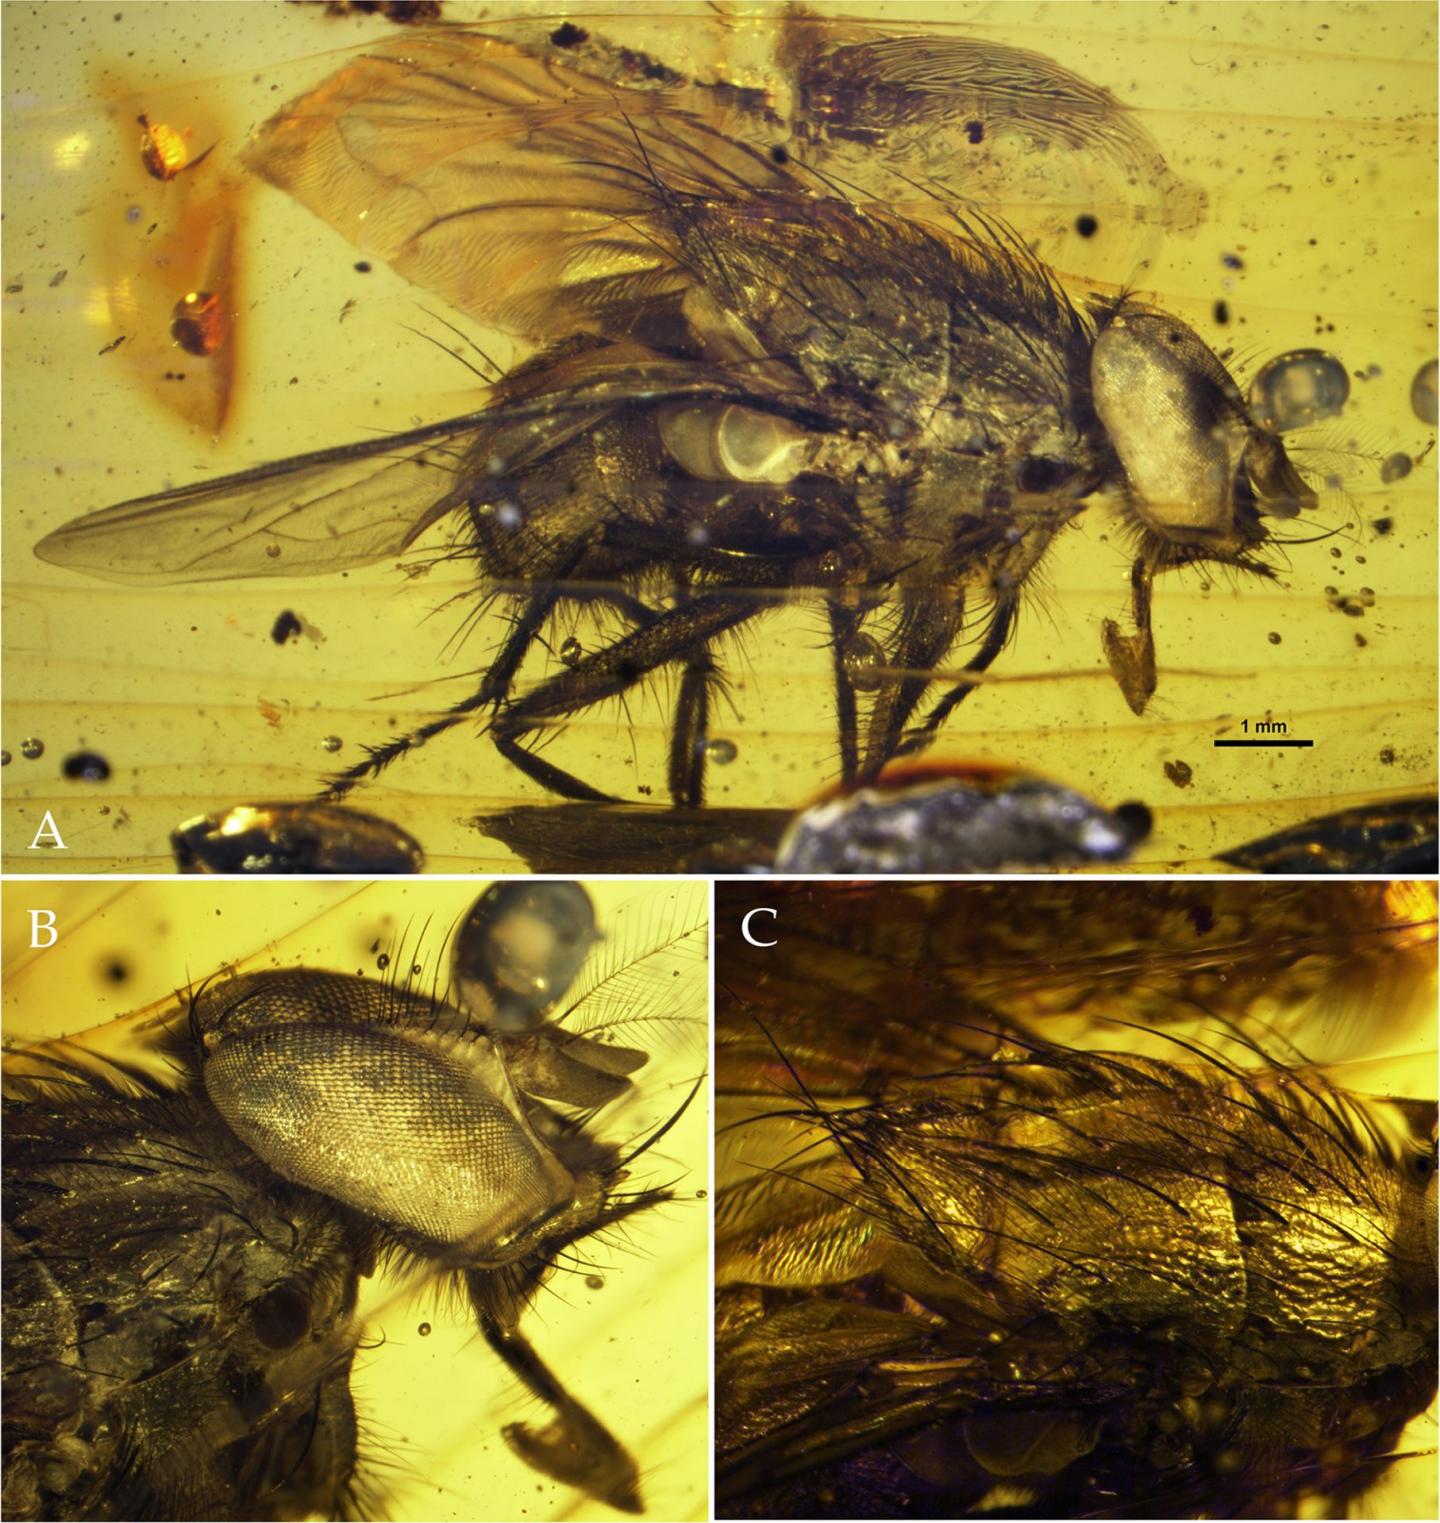 New Fly Fossil Sheds Light on the Explosive Radiation of Flies during the Cenozoic Era